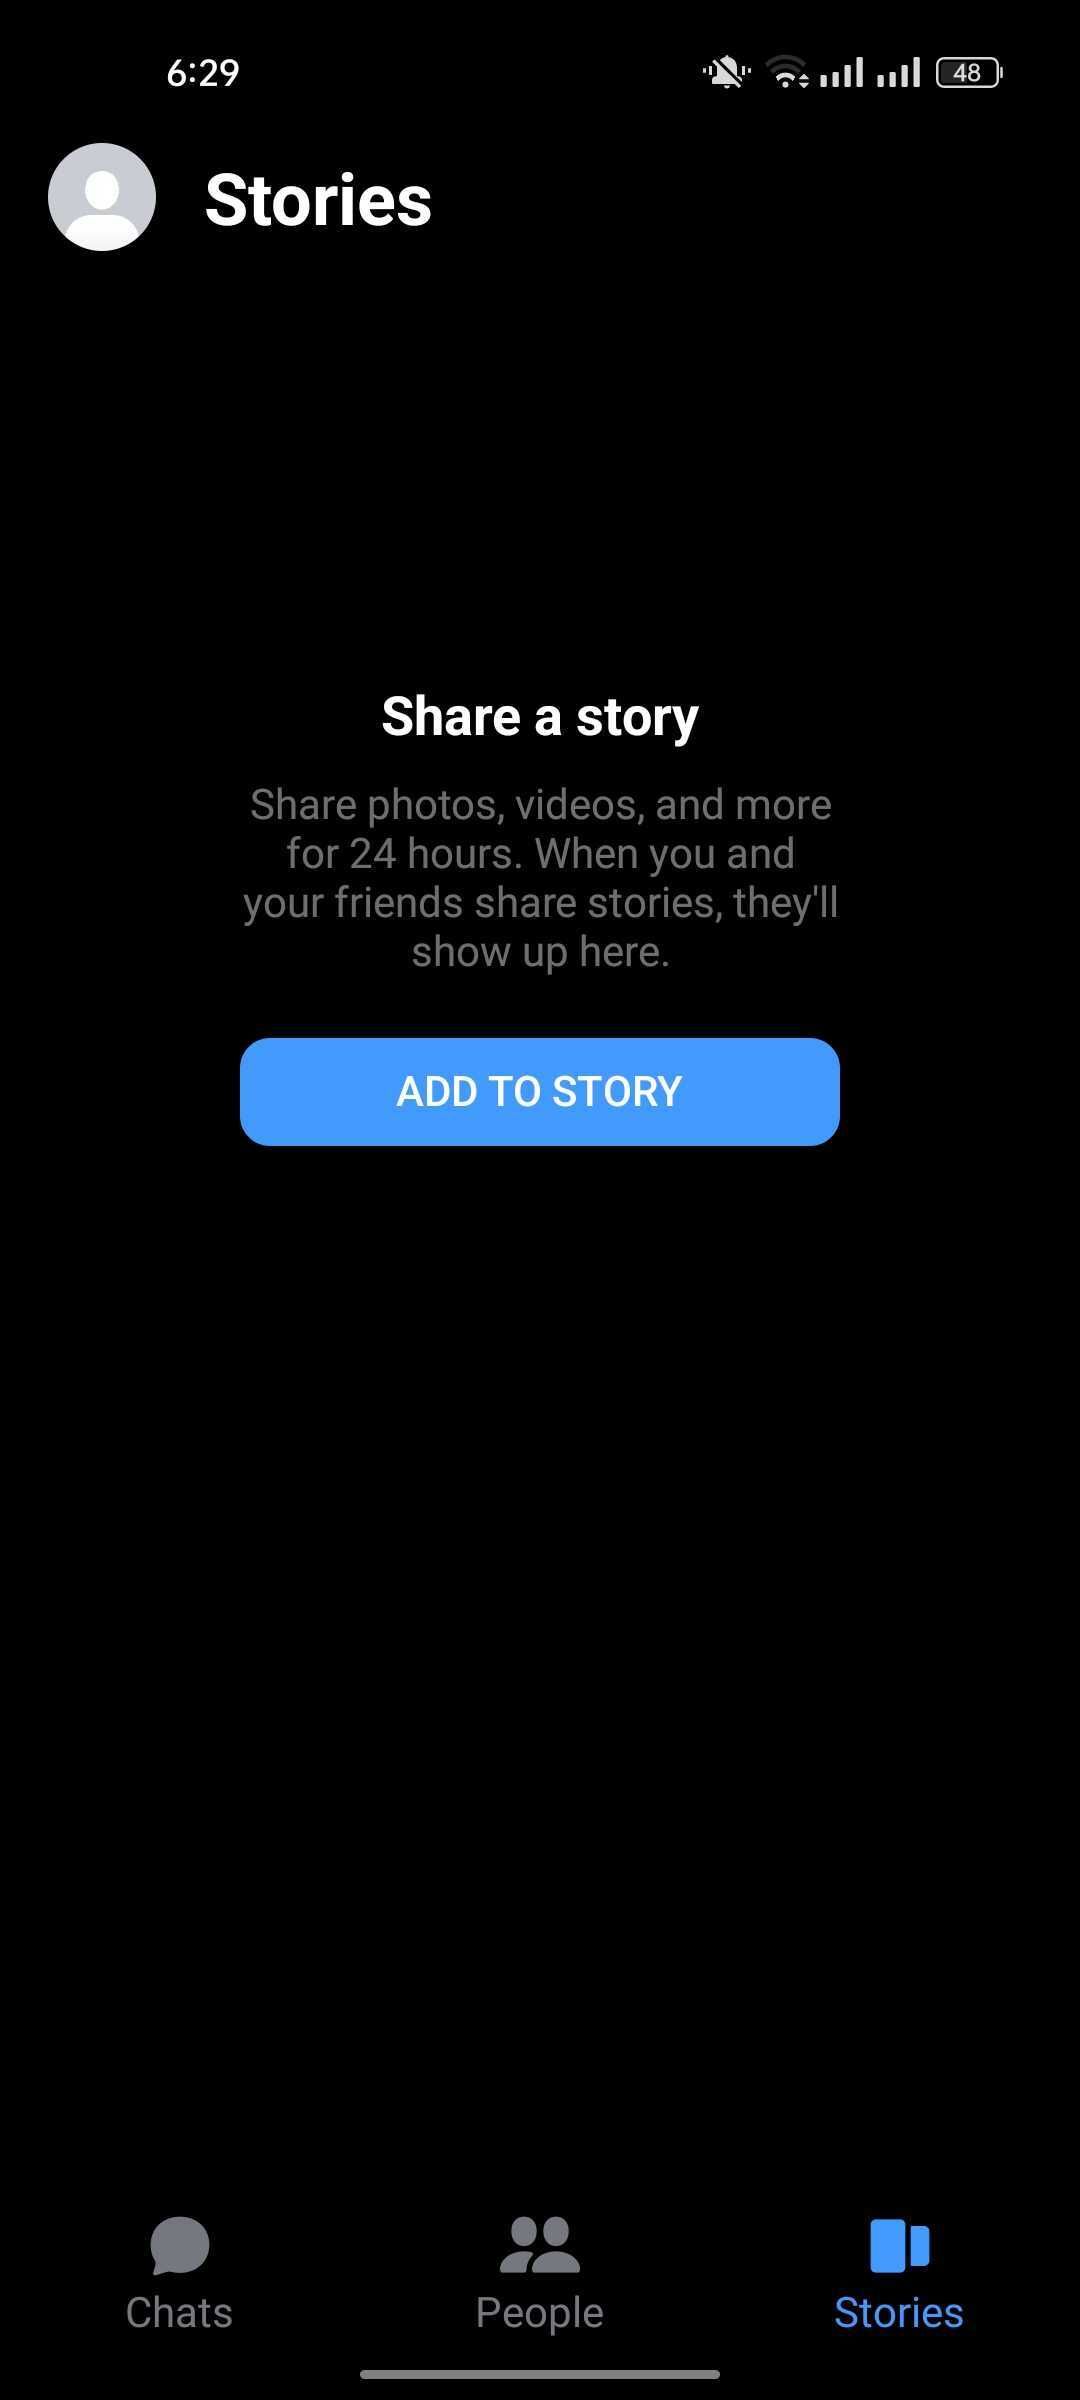 Add a story in Messenger